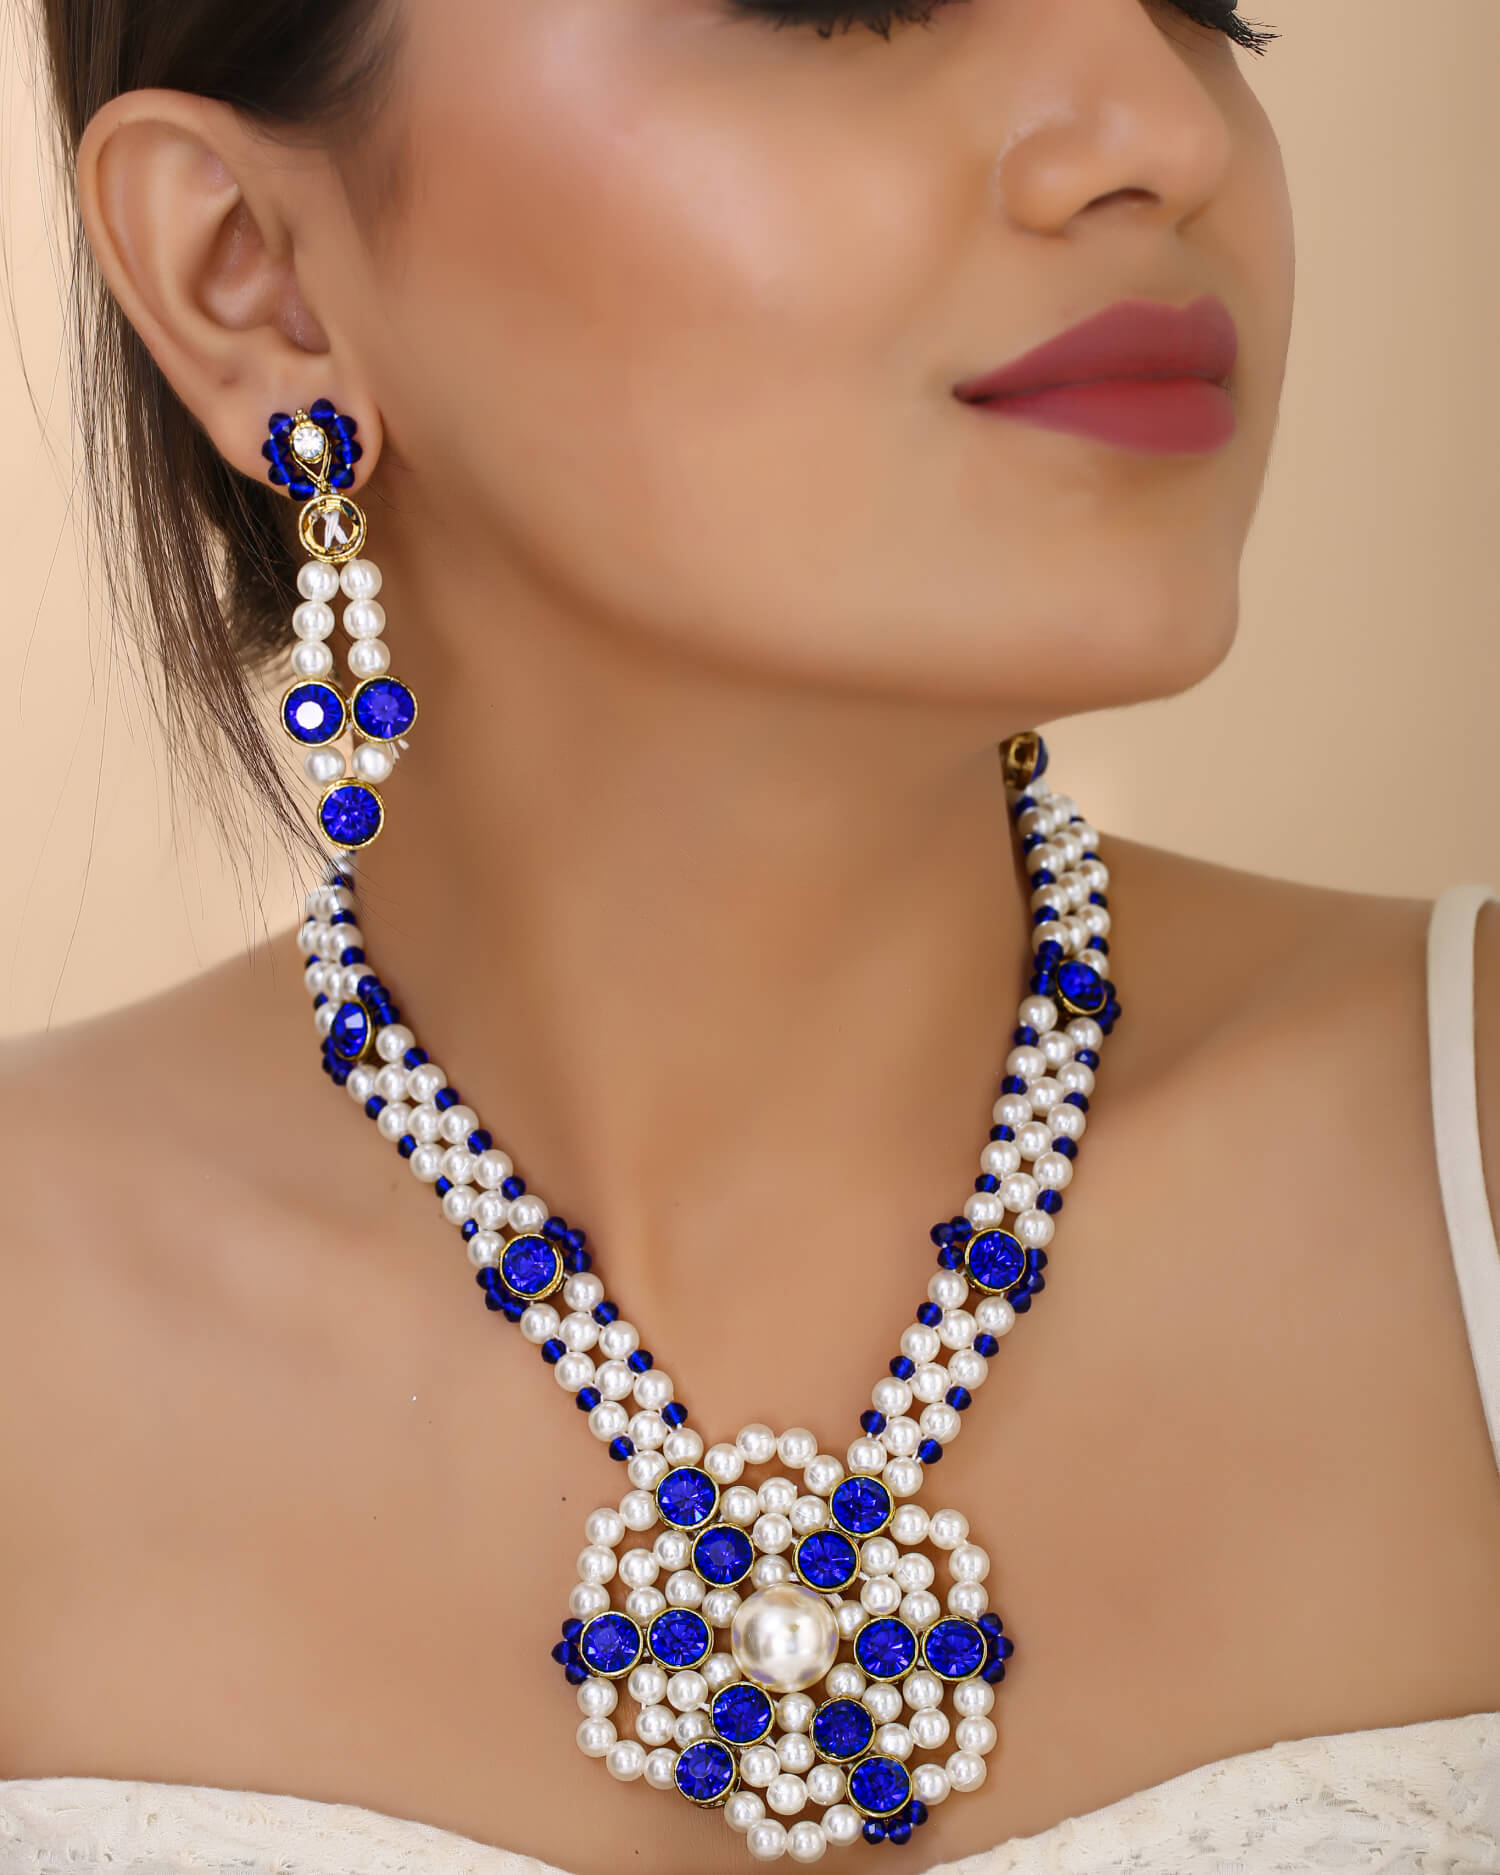 Blue Sapphire & White CZ Stone Necklace Set: Gift/Send Jewellery Gifts  Online J11135453 |IGP.com